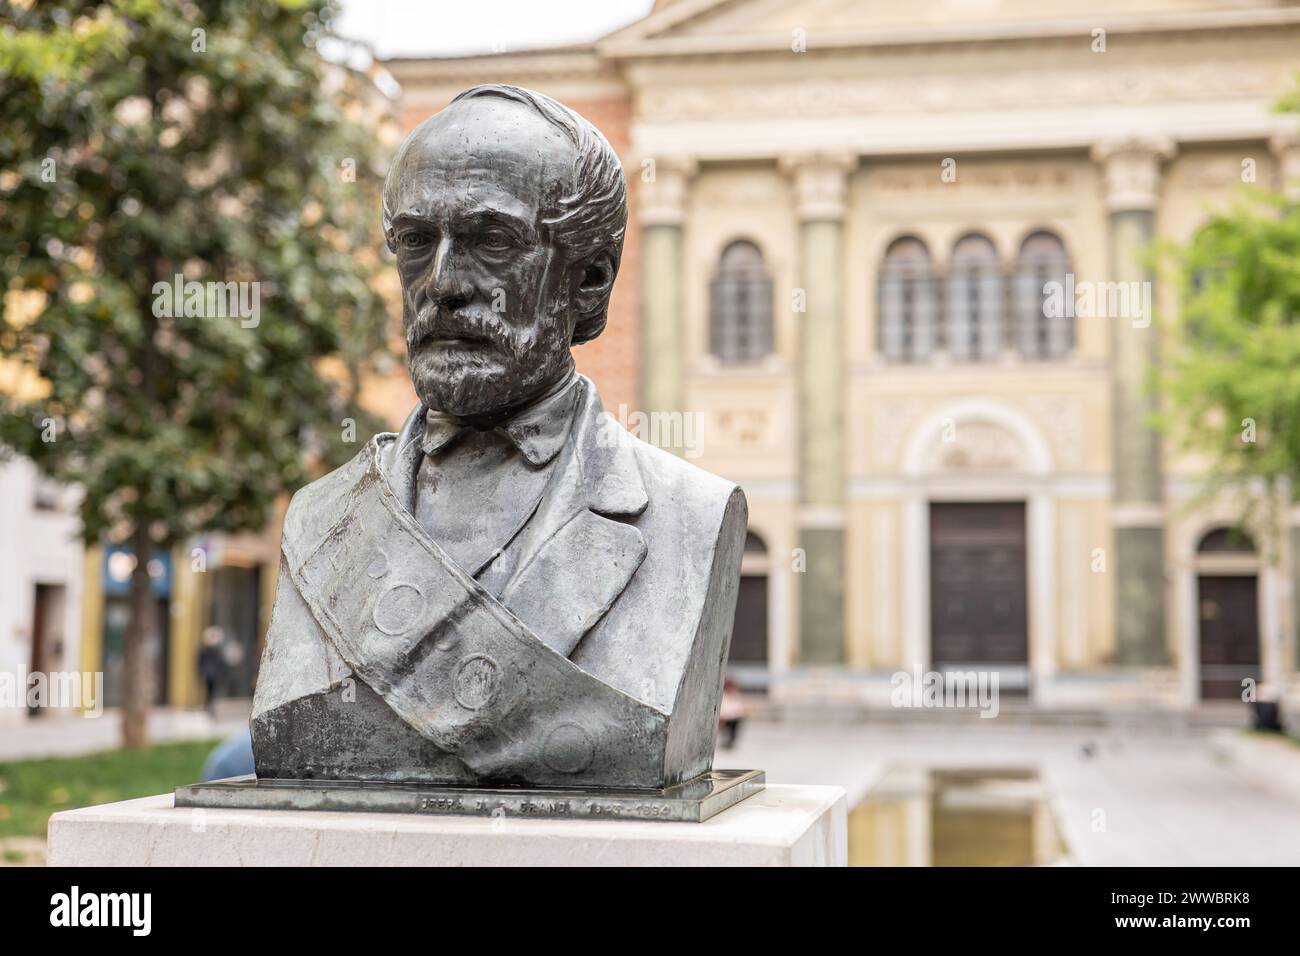 MODENA, ITALY - APRIL 21, 2022: Statue and bust of Giuseppe Mazzini in front of Synagogue of Modena, Italy Stock Photo